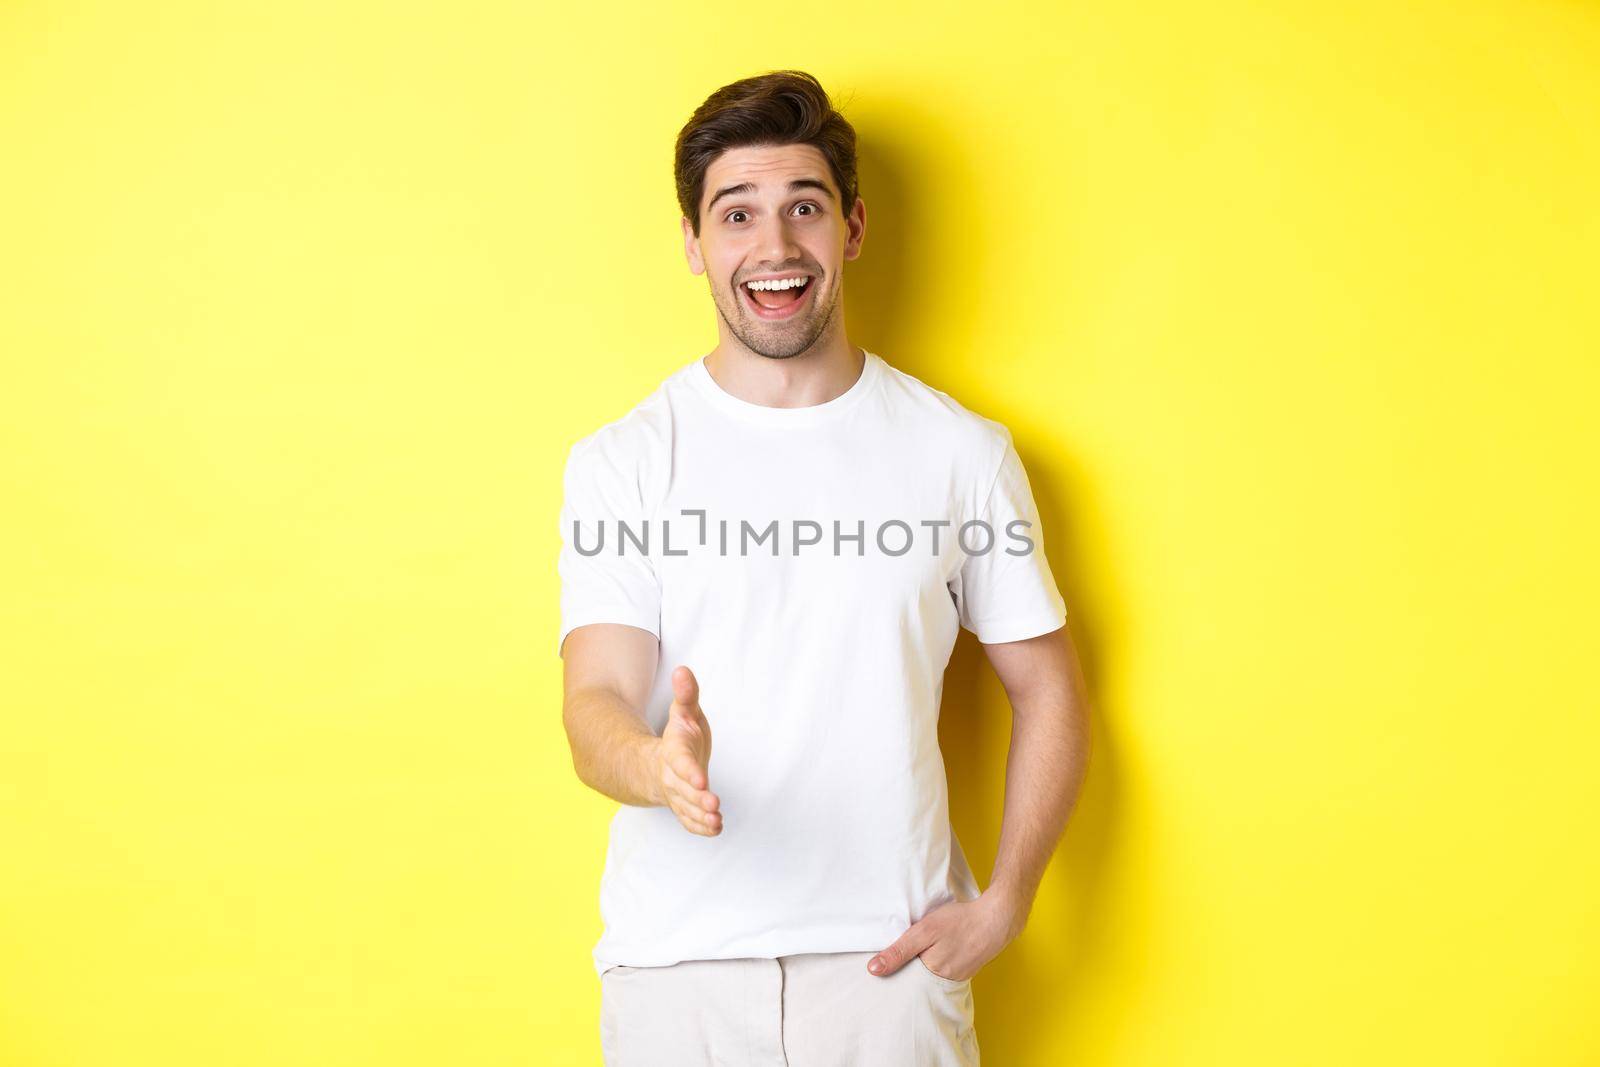 Friendly man greeting you with handshake, smiling amused, saying hello, standing over yellow background.